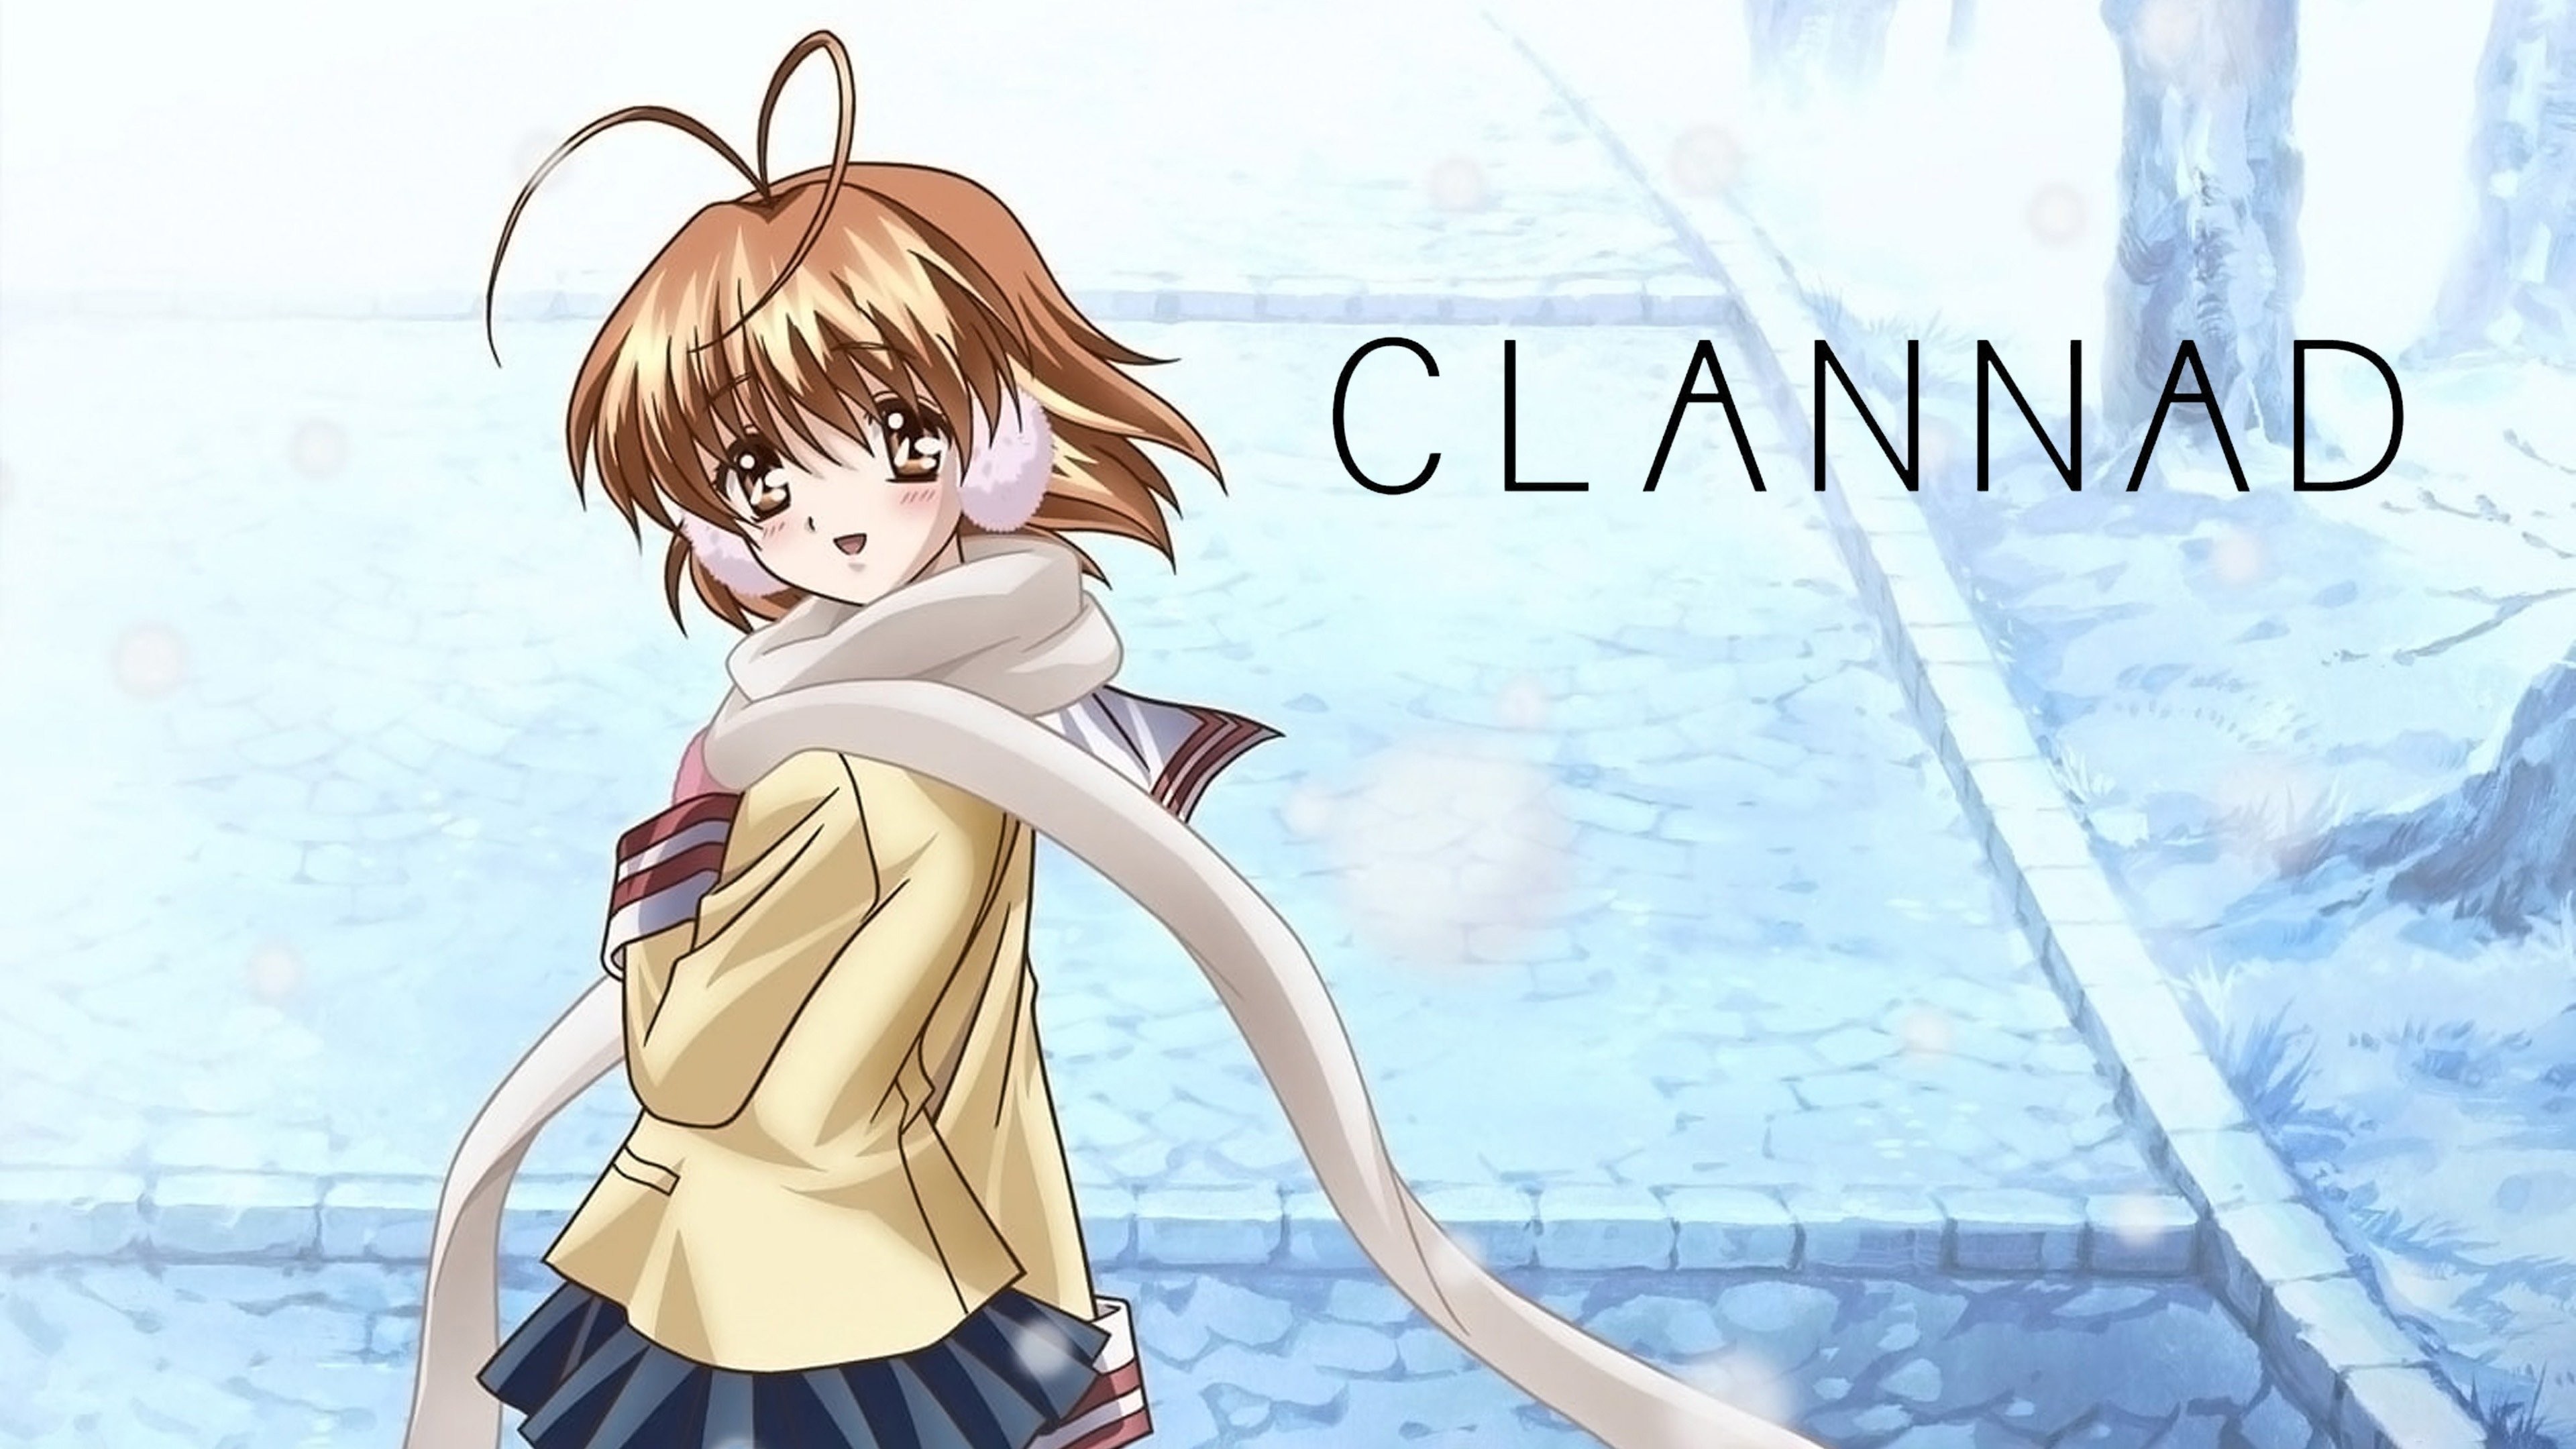 Clannad After Story : : Movies & TV